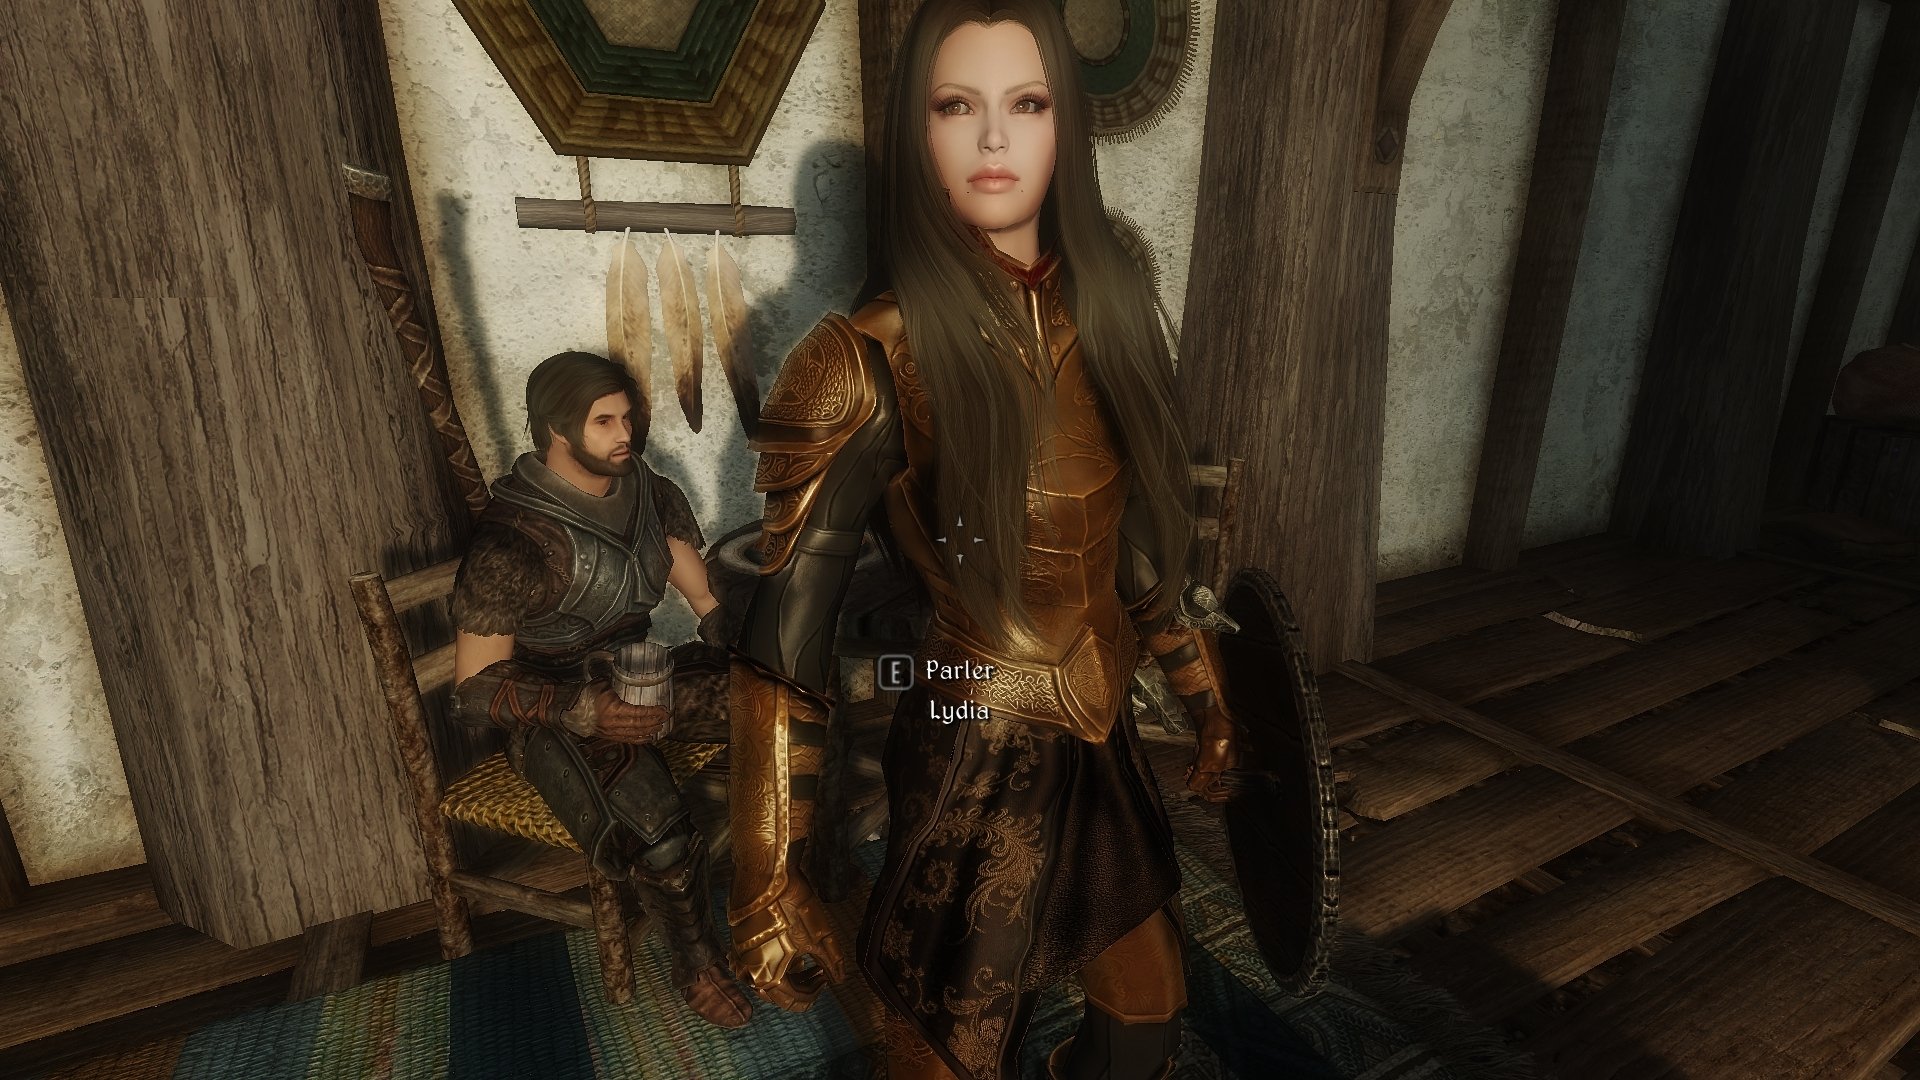 Need Help Looking For Armor Mod Request And Find Skyrim Non Adult